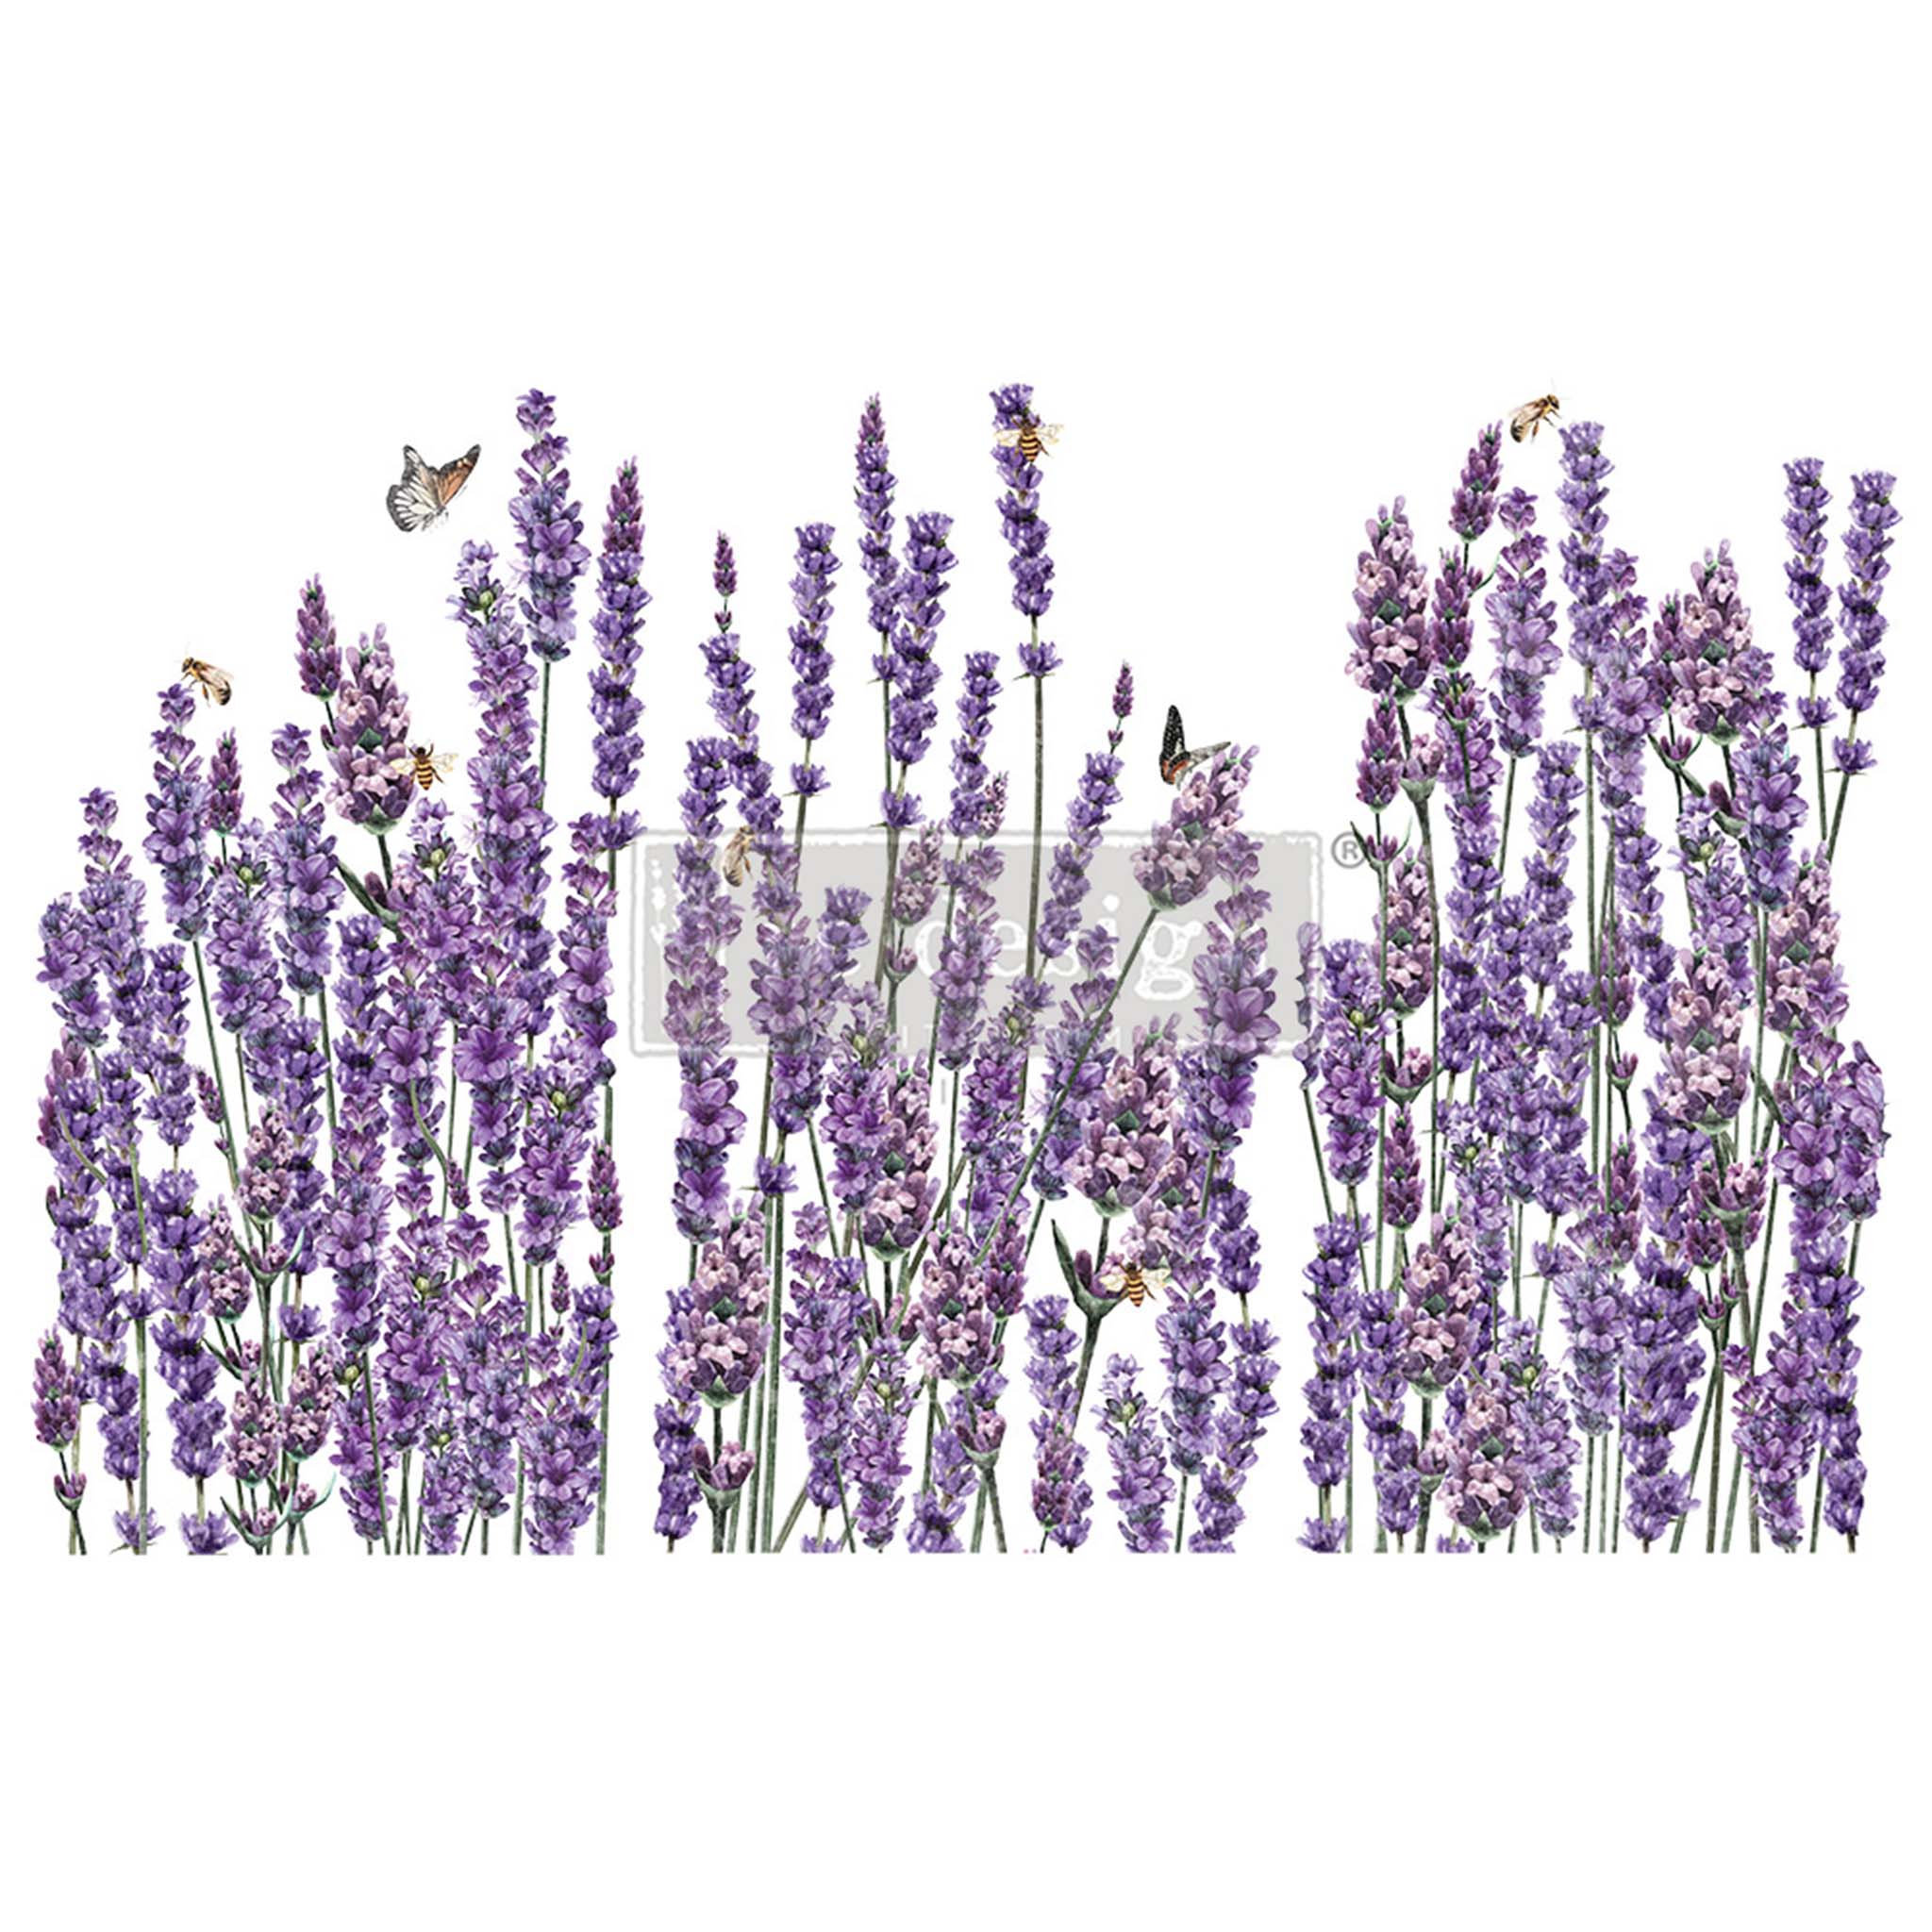 Rub-on transfer of beautiful lavender plants with butterflies and bees.